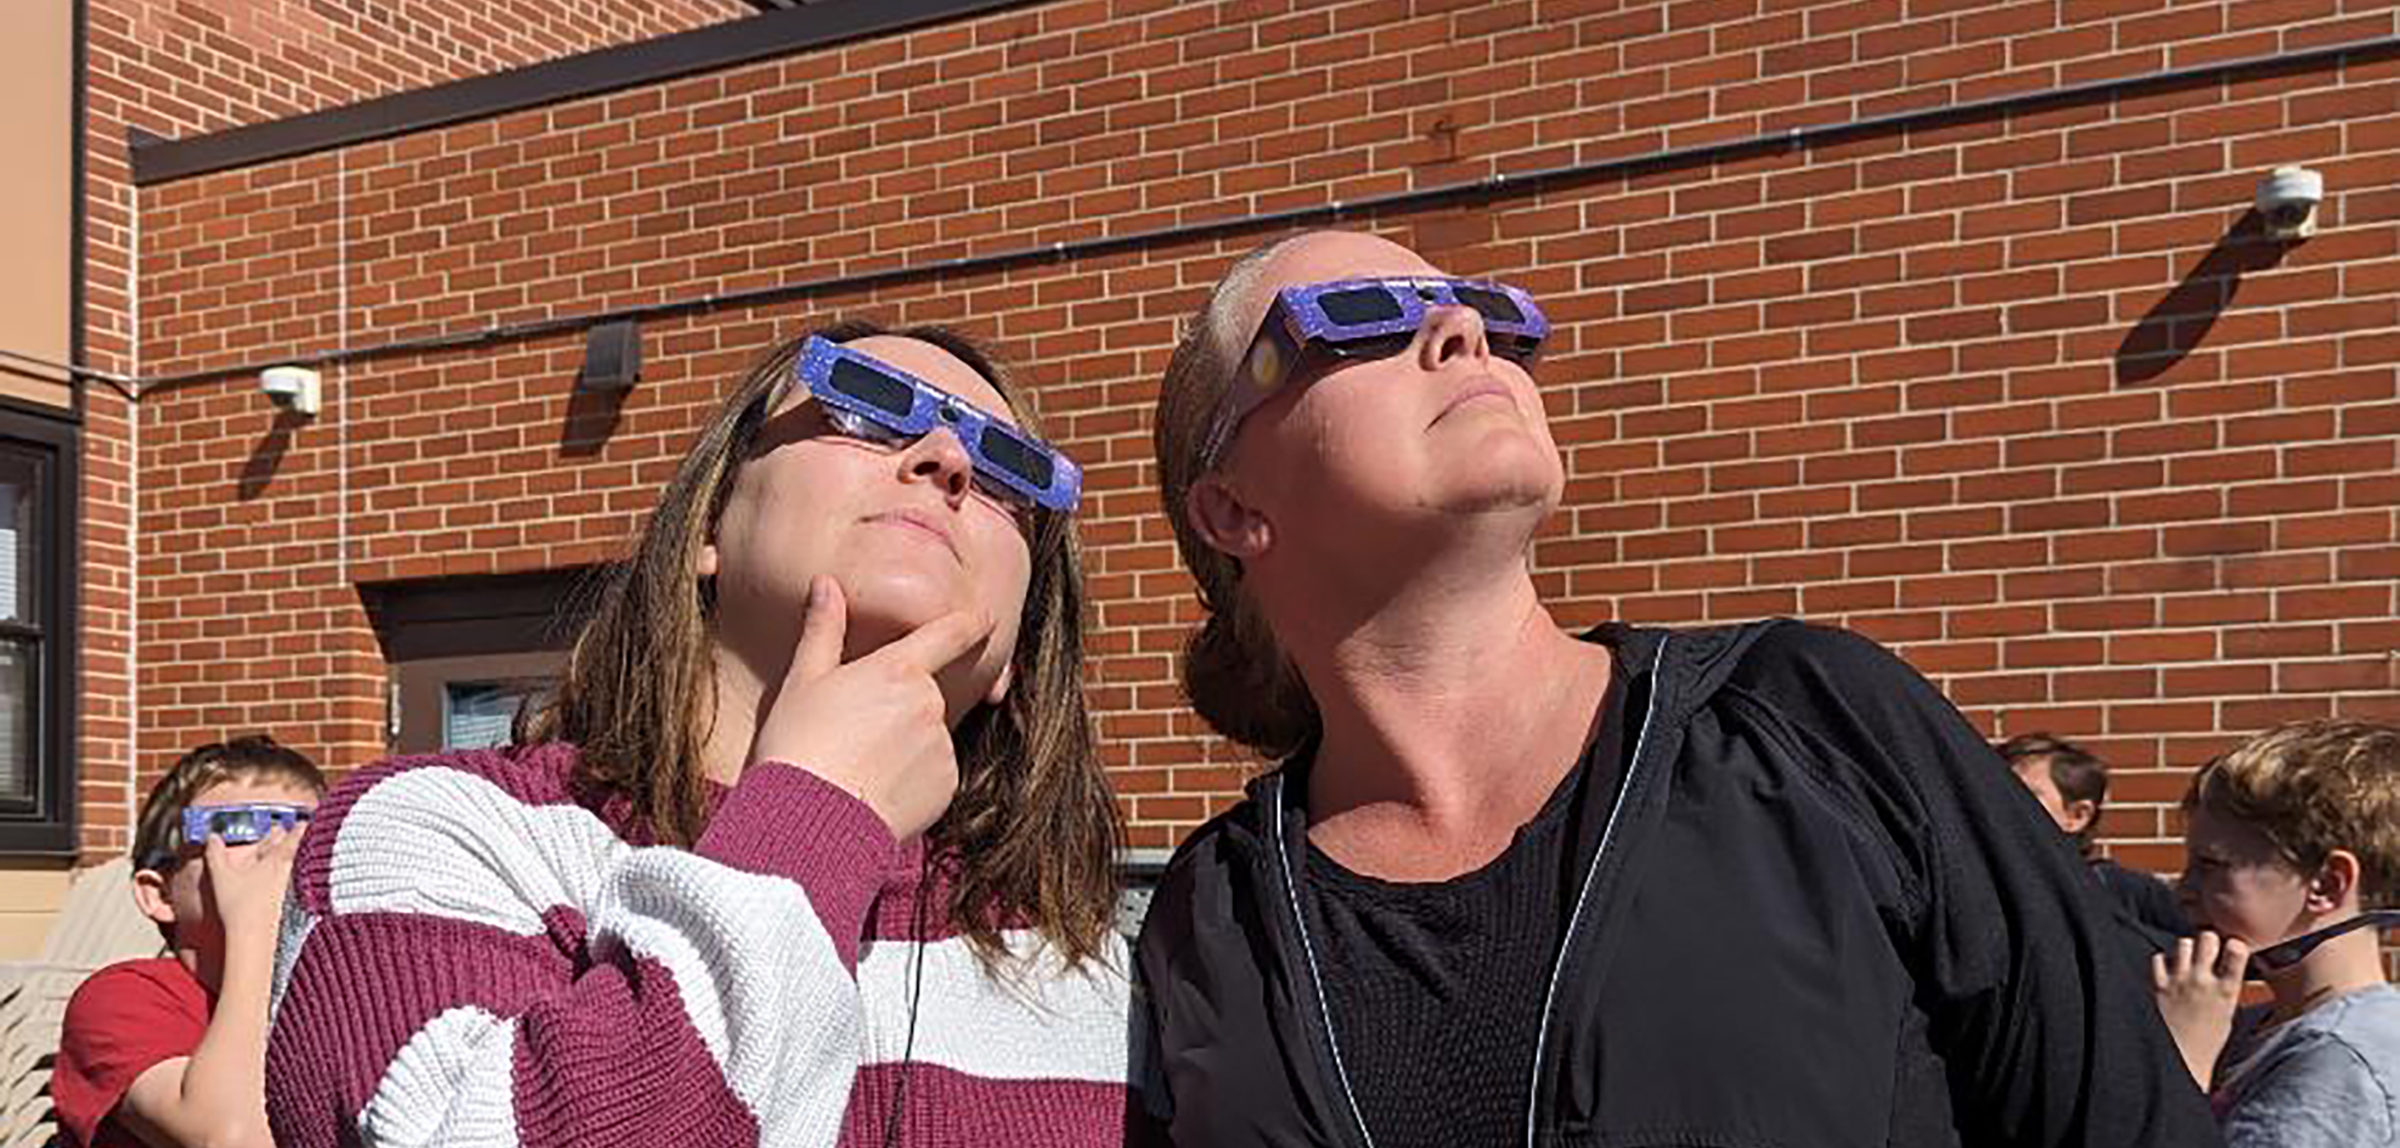 Two women look at the solar eclipse through protective glasses